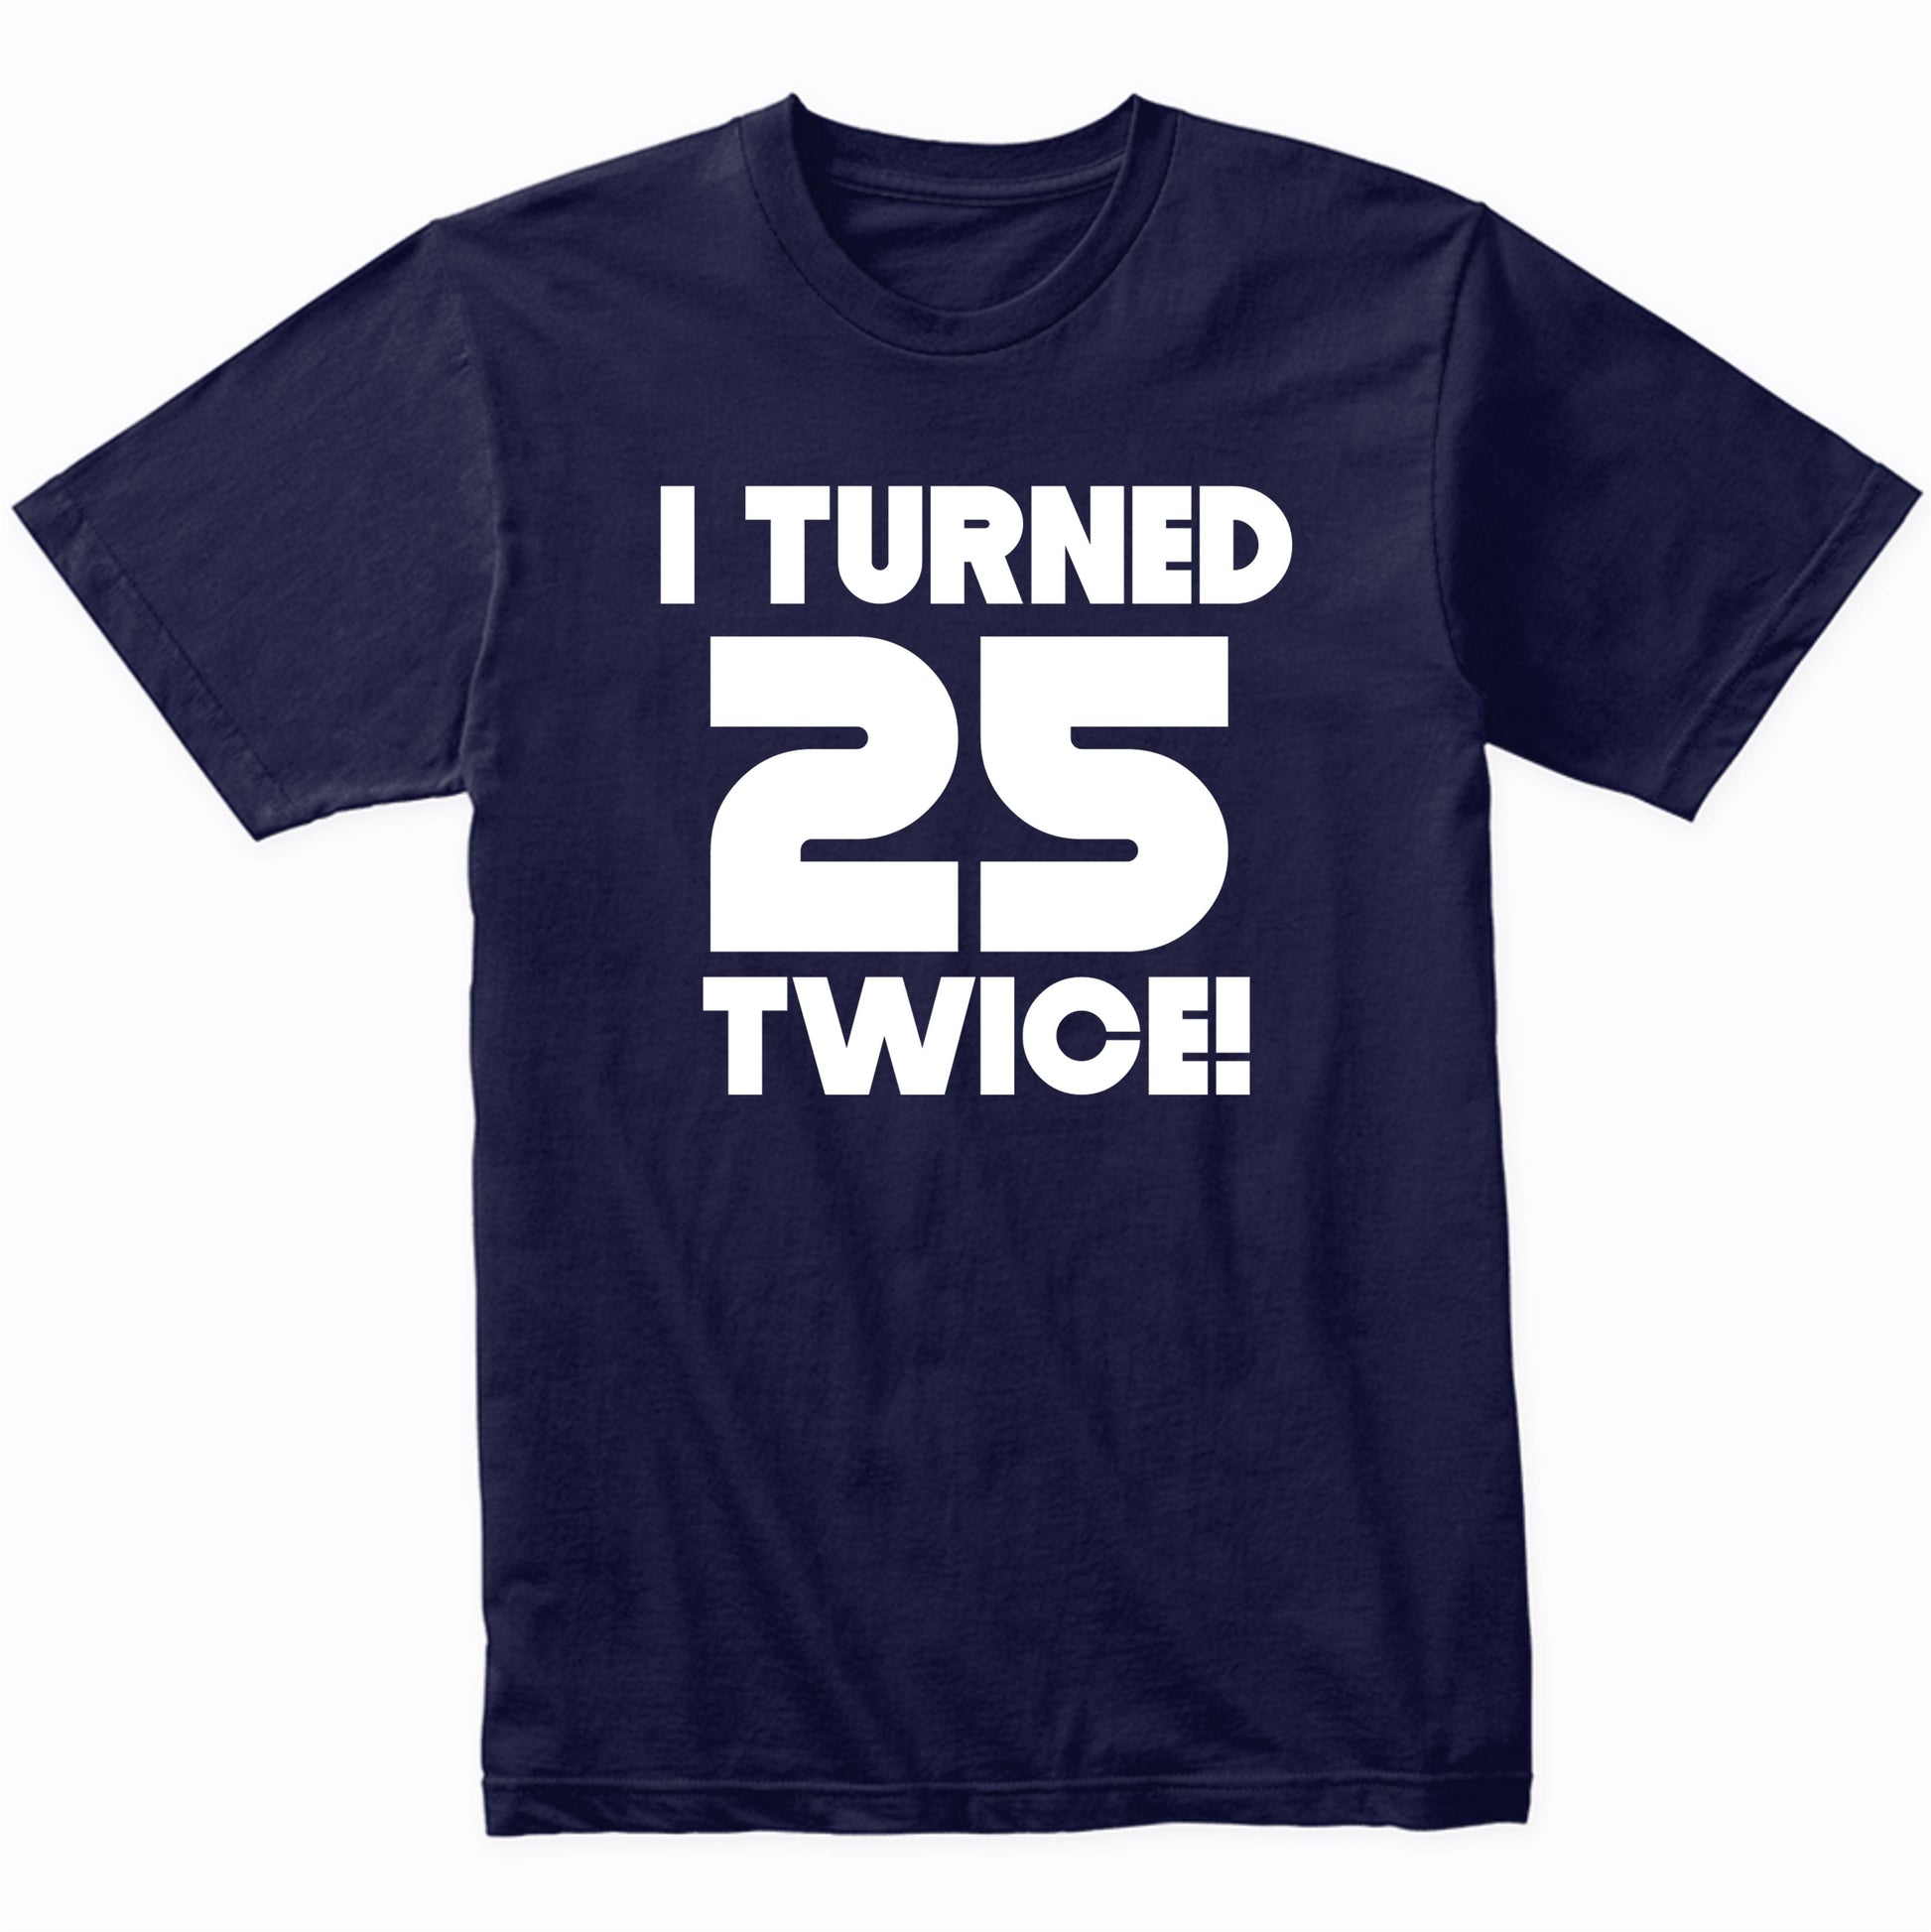 I Turned 25 Twice 50 Years Old Funny 50th Birthday T-Shirt